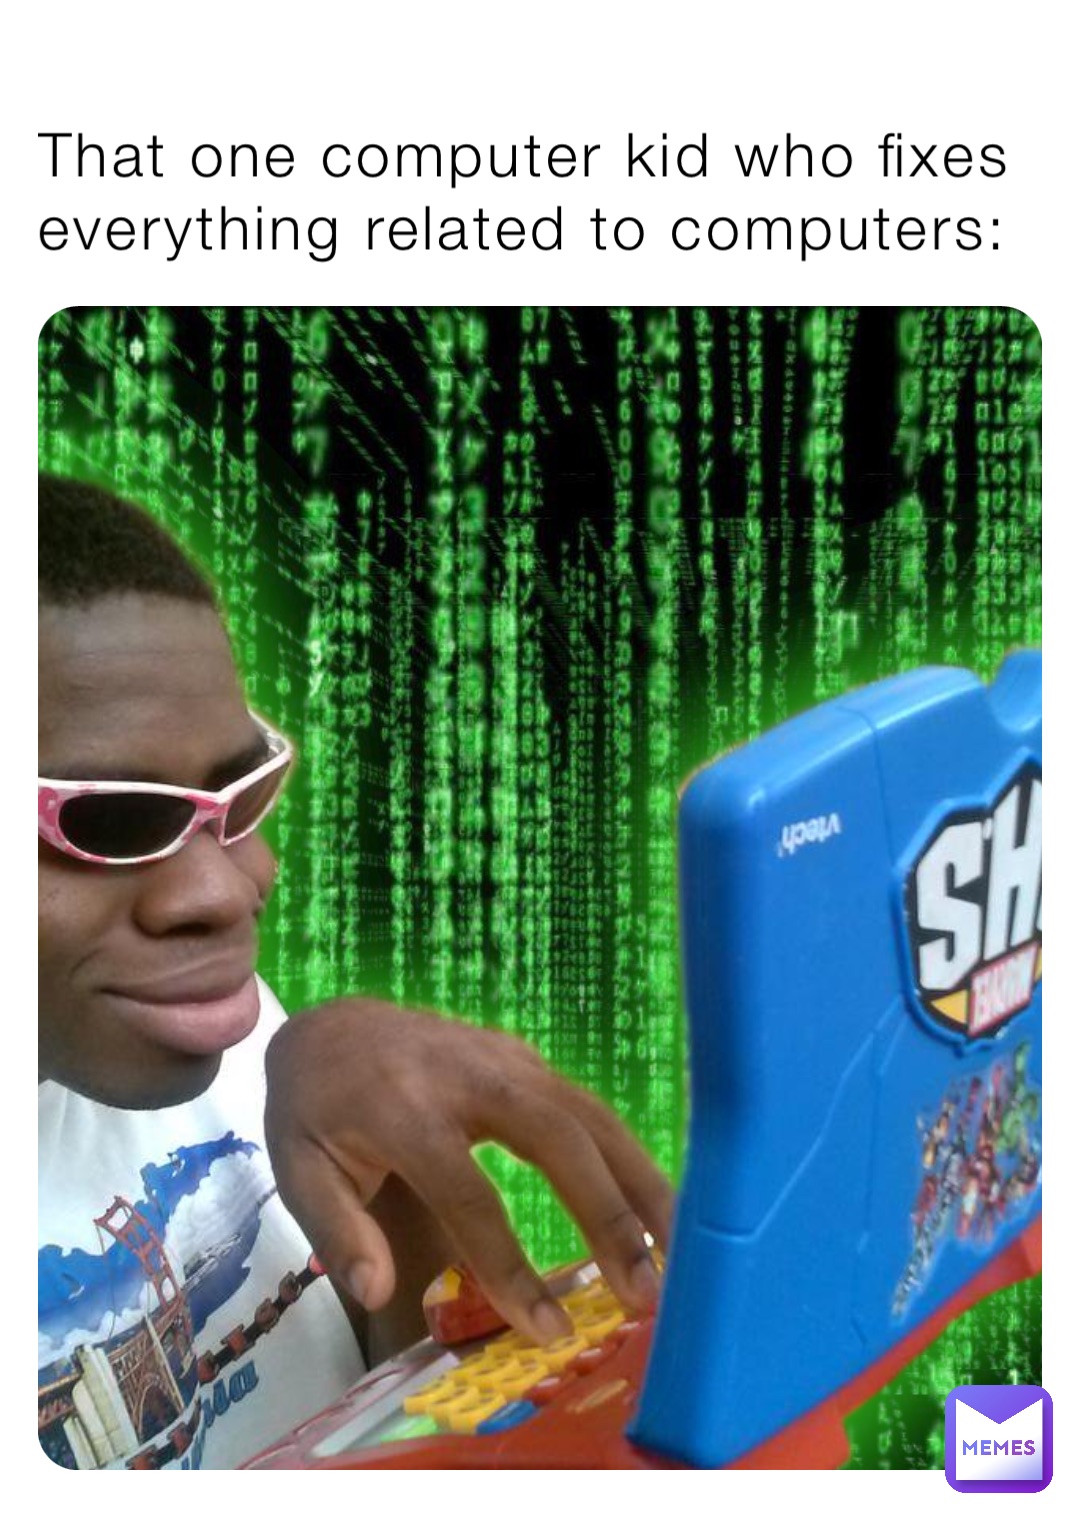 That one computer kid who fixes everything related to computers: